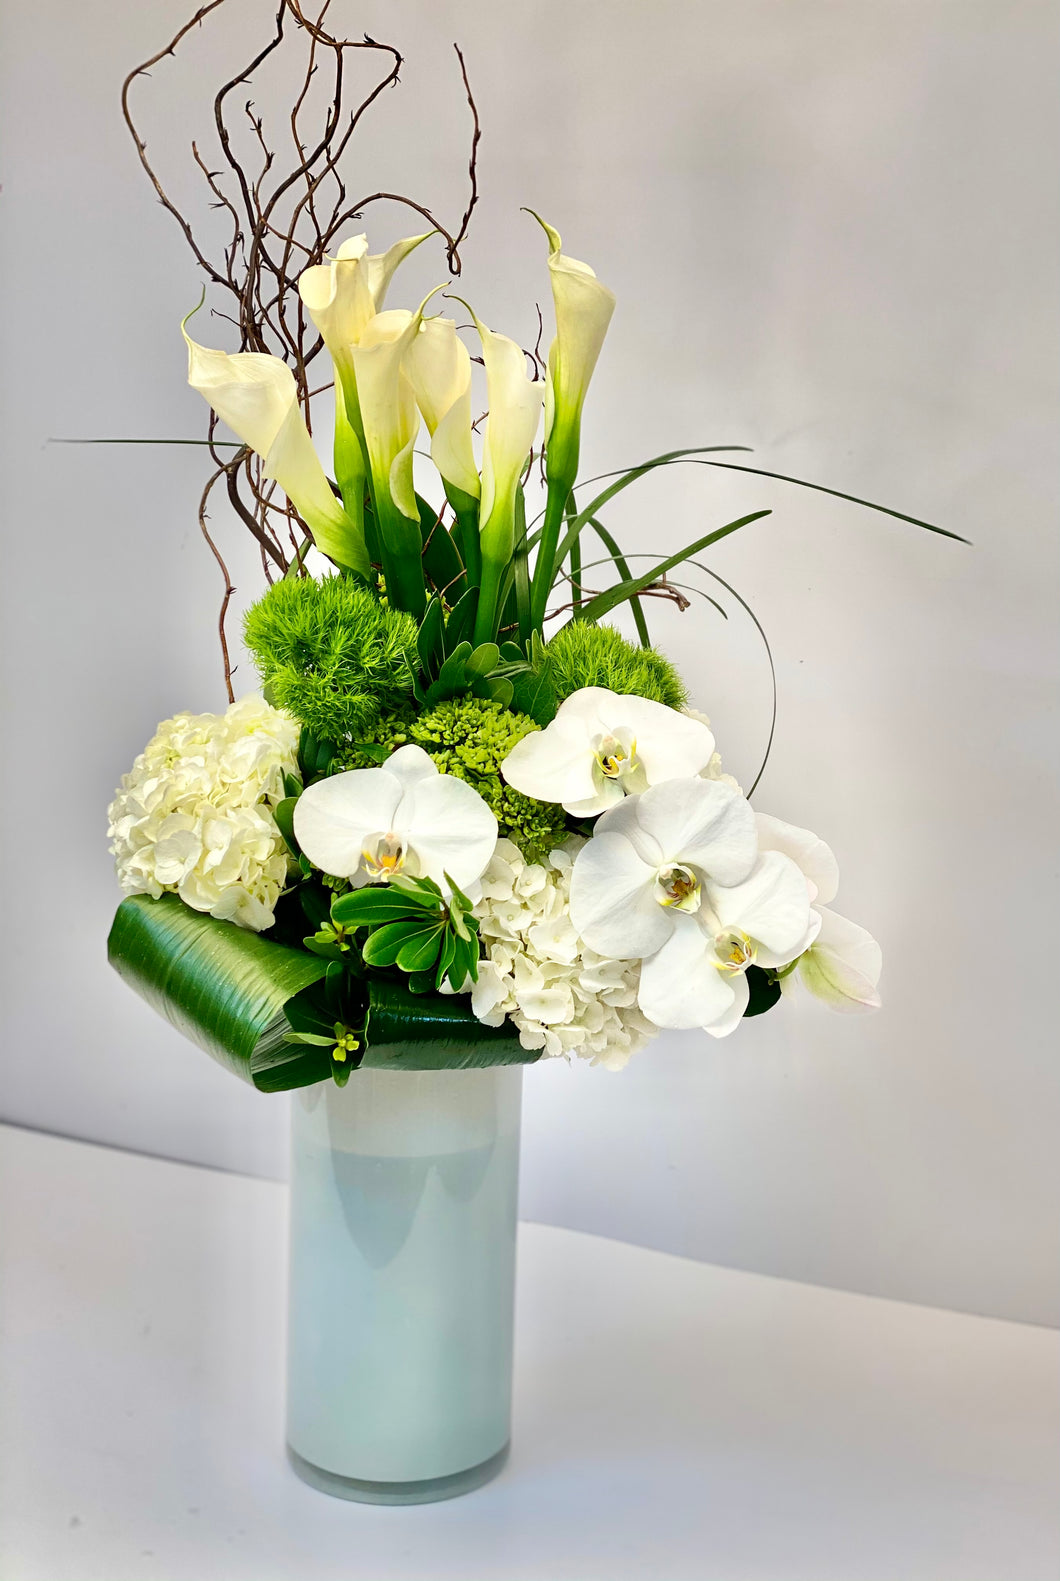 F139 - Modern White and Green Arrangement (White vase sold out, substituting clear vase with leaf wrap) - Flowerplustoronto